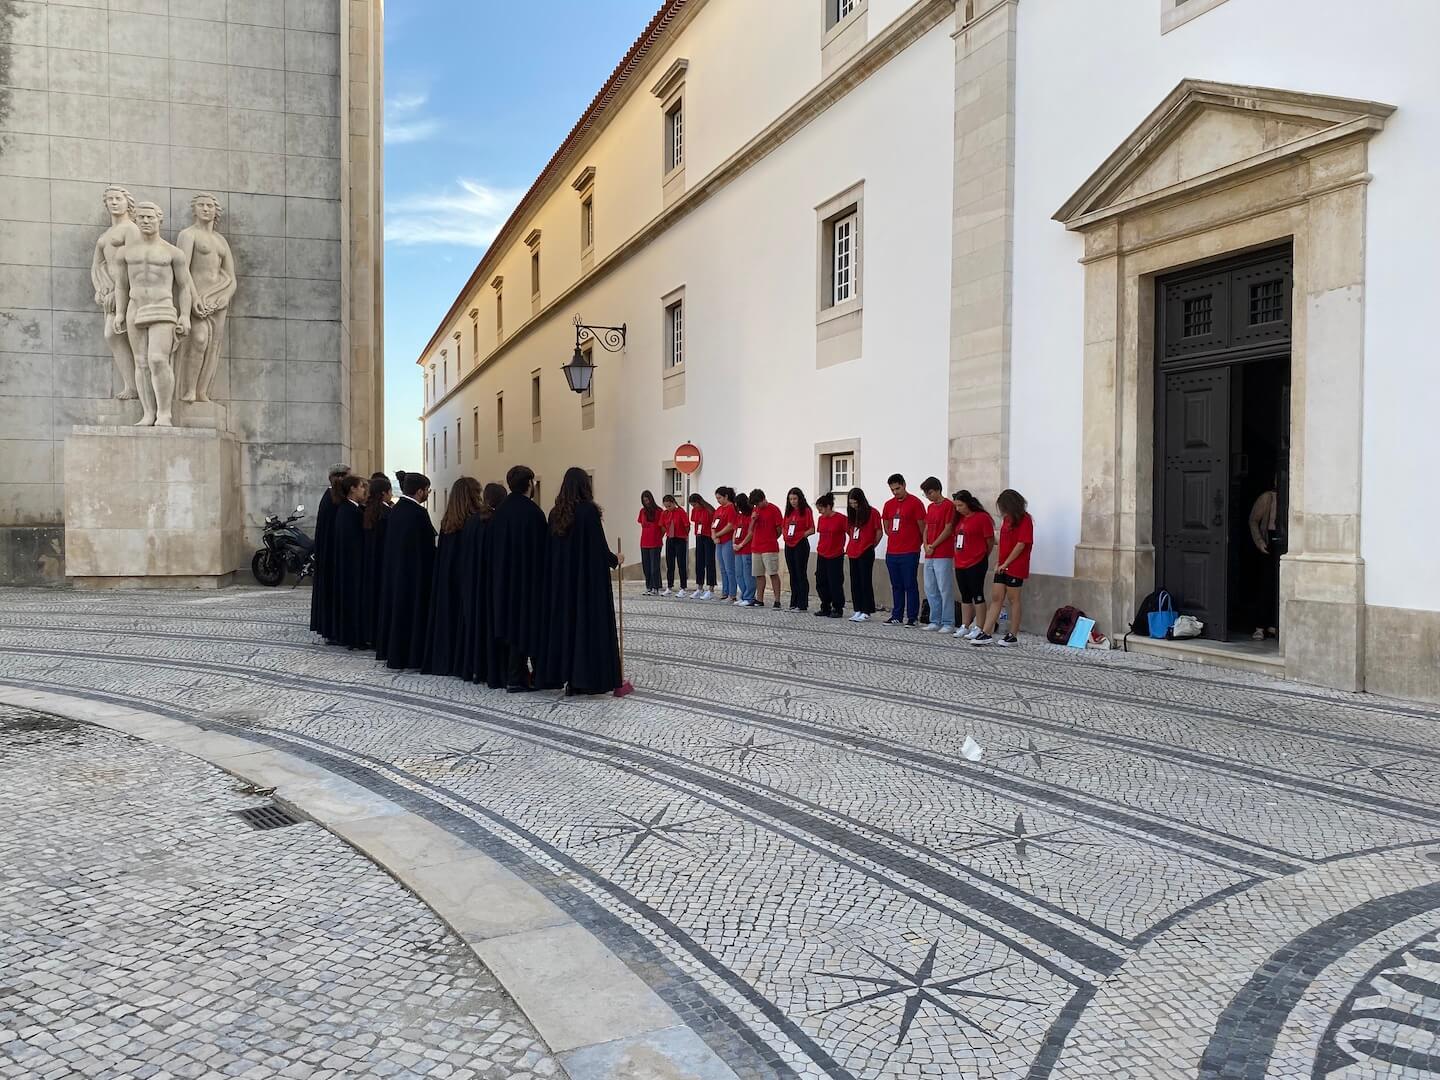 Witnessing Coimbra's student traditions